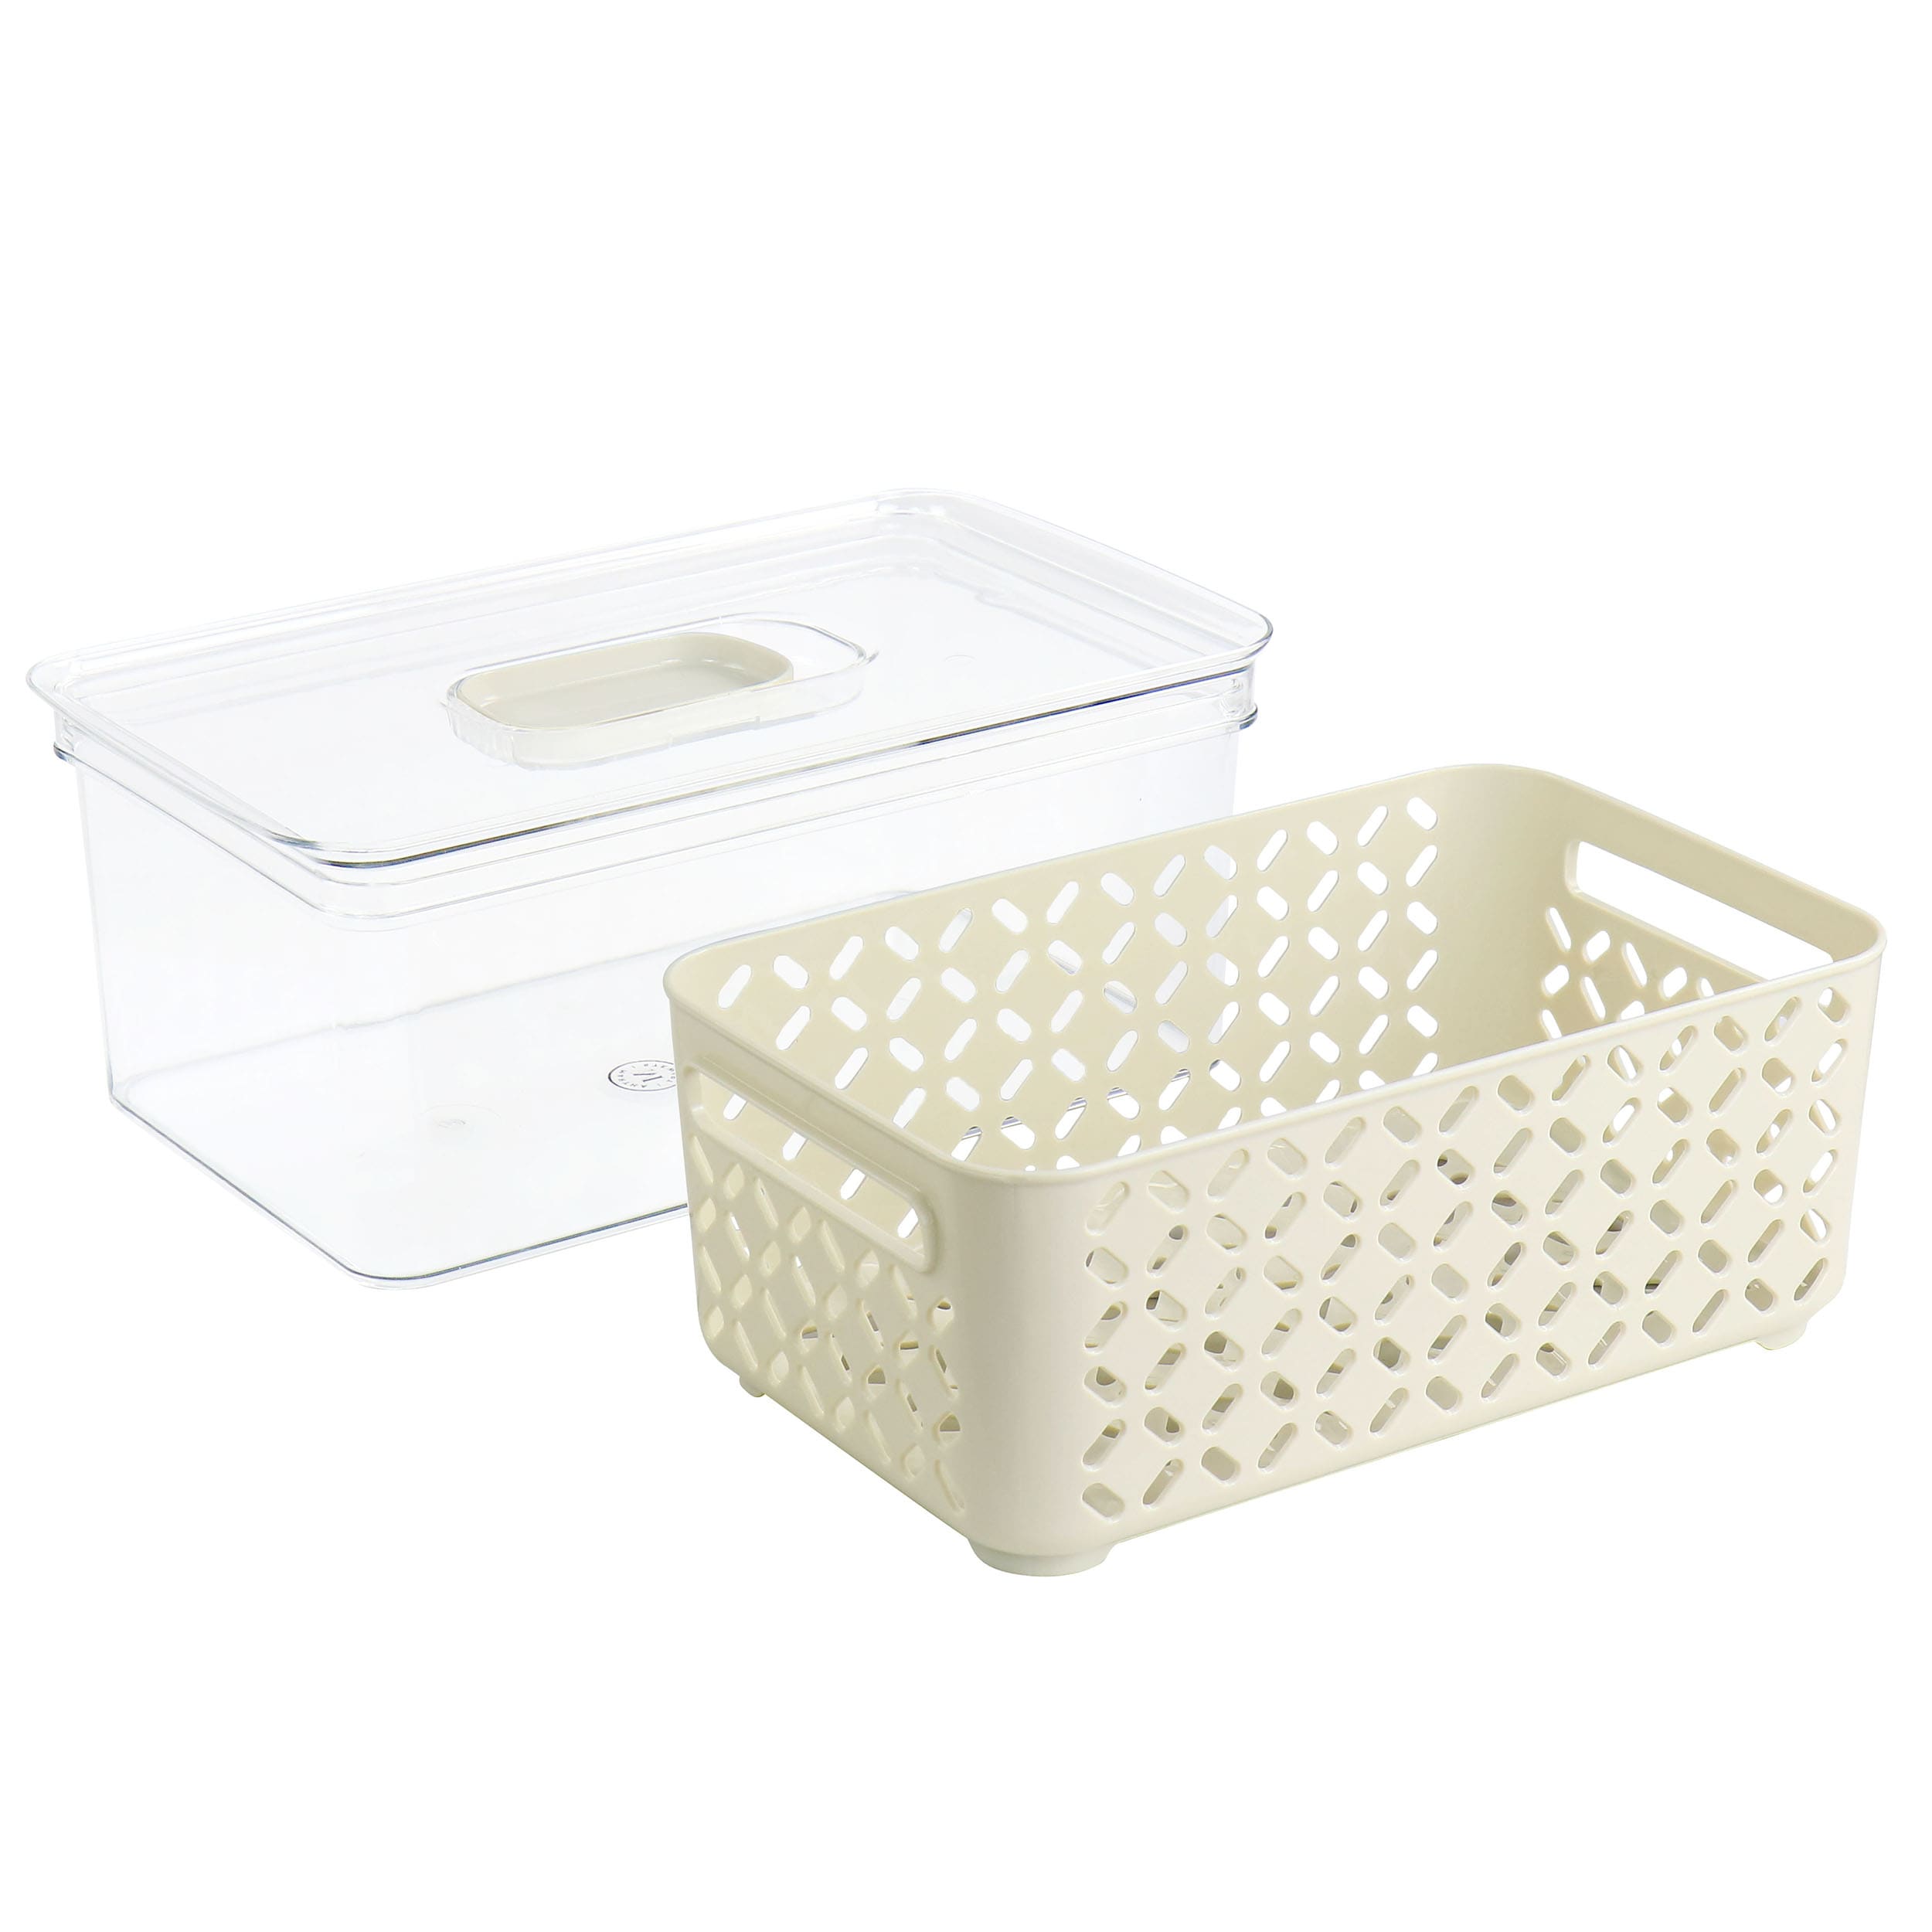 Reusable Storage Containers » The Martha Review